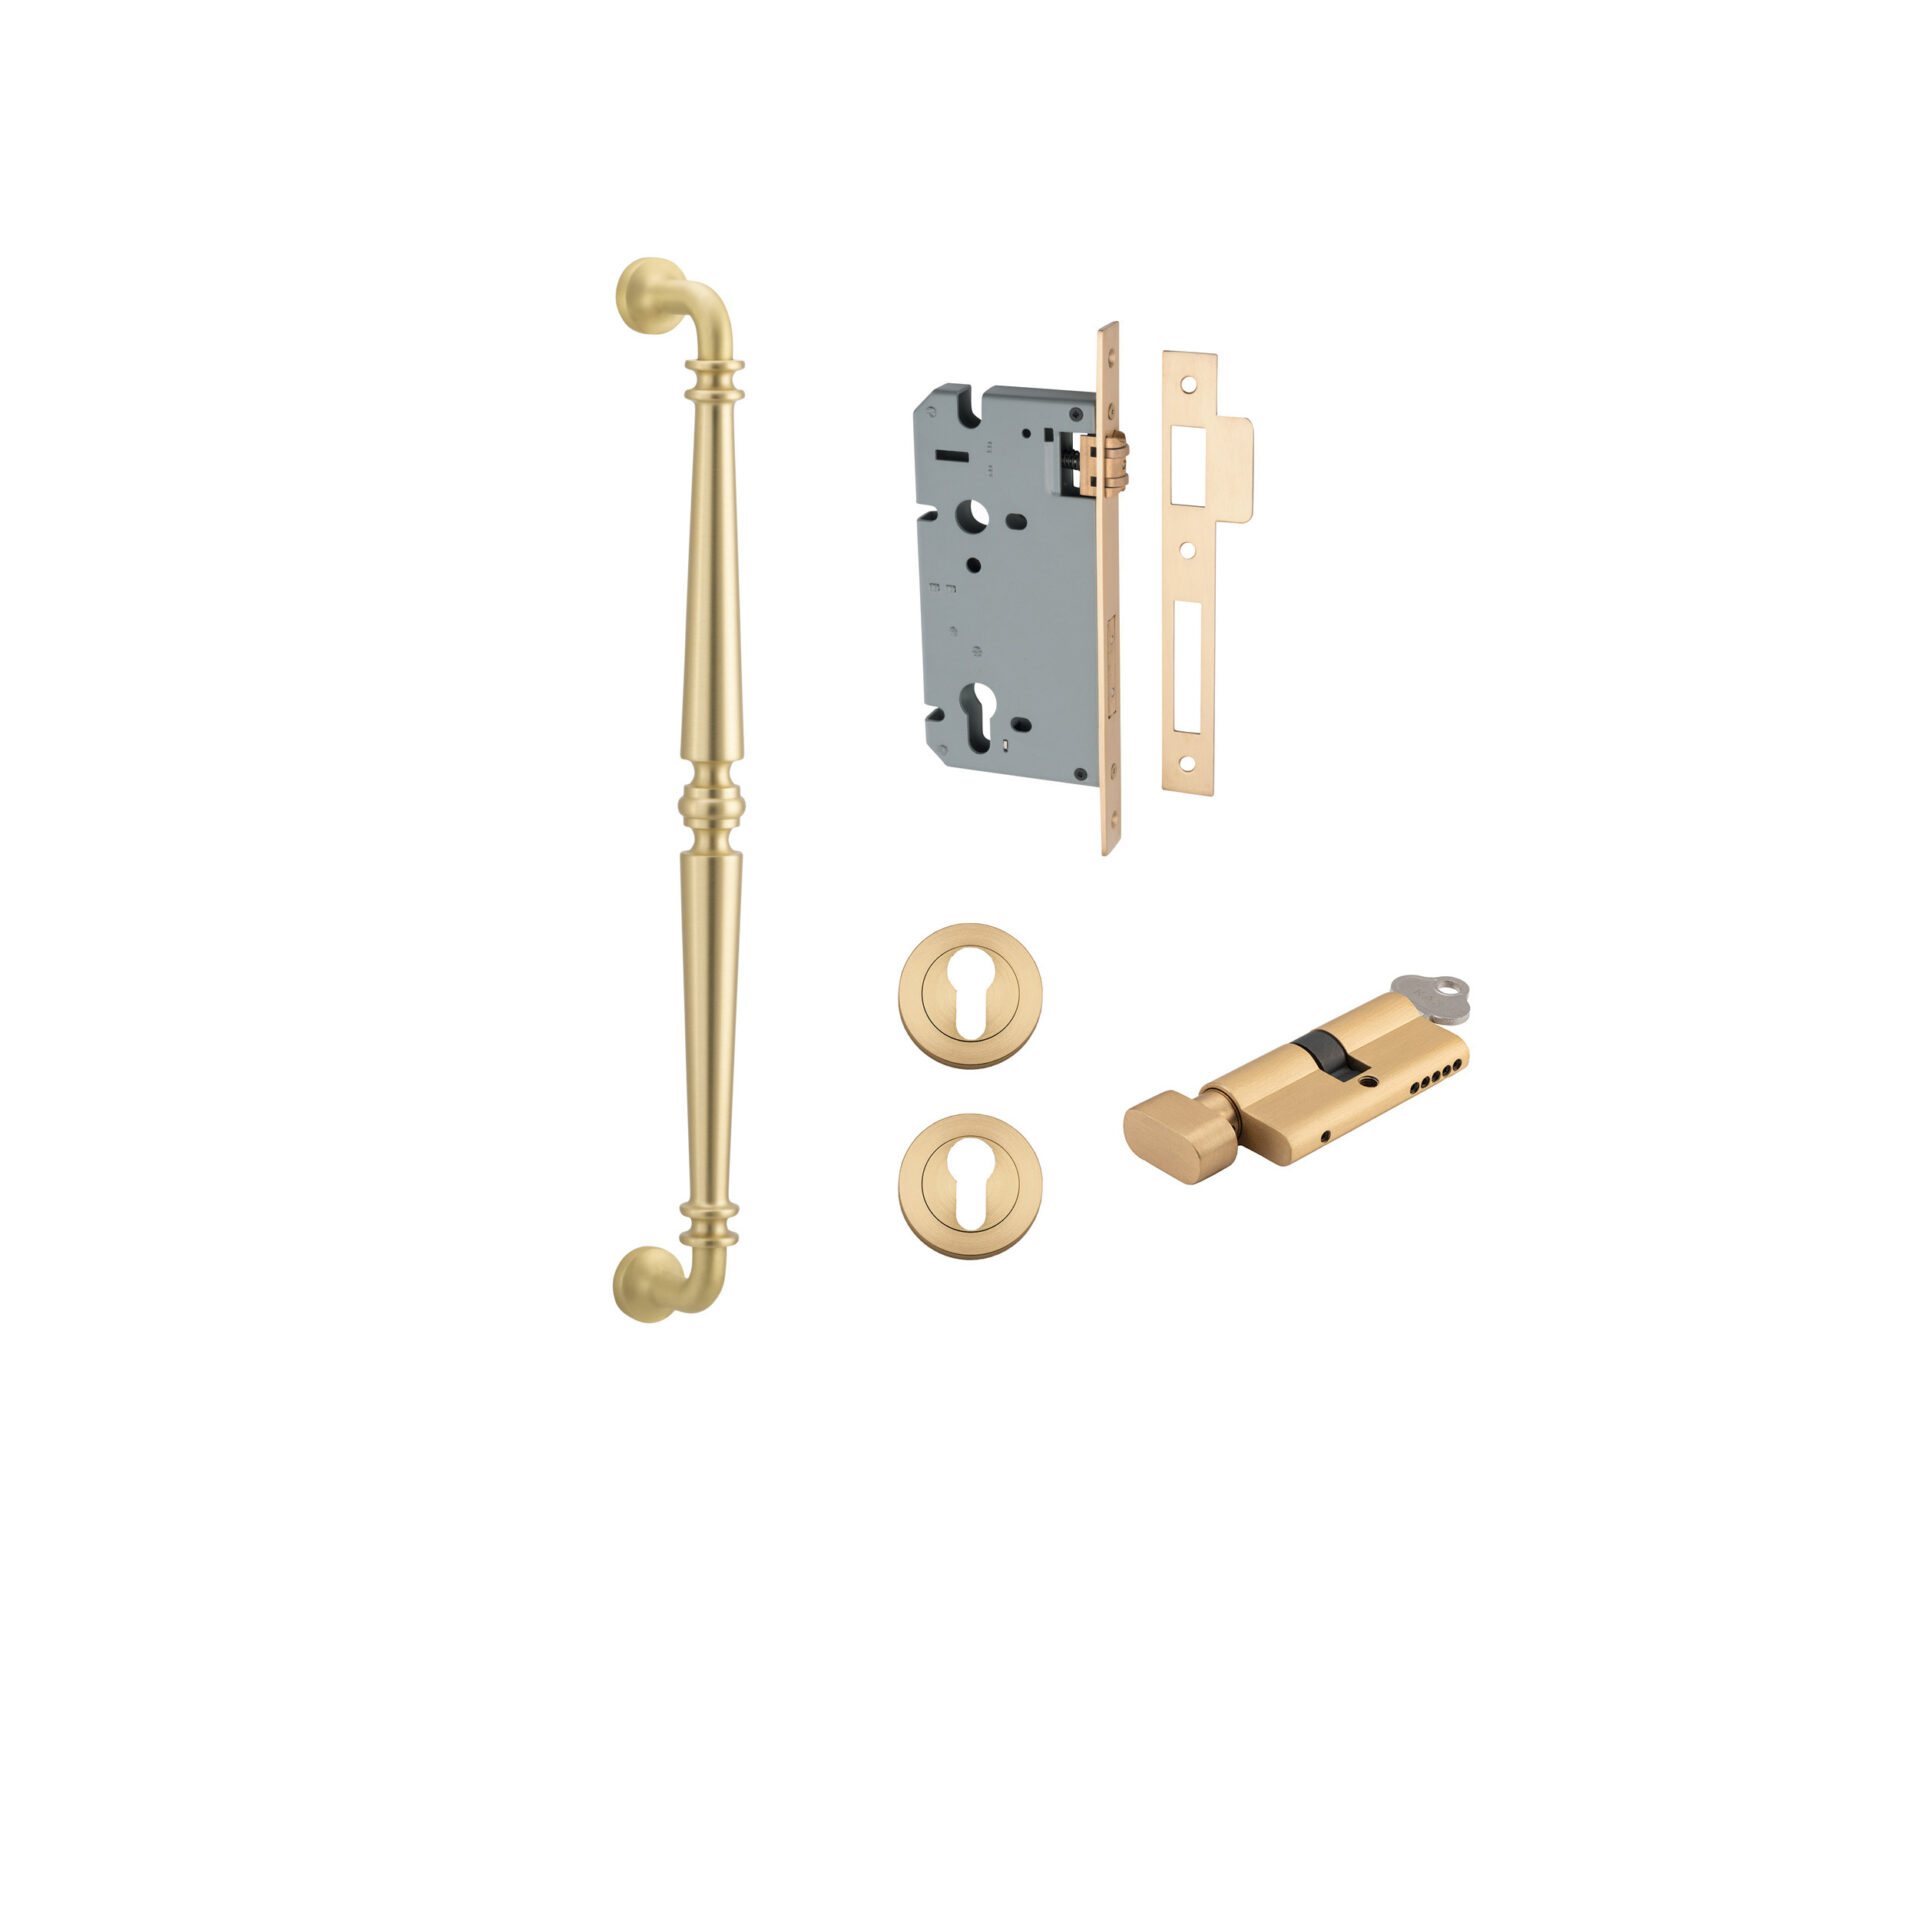 17101KENTR60KT - Sarlat Pull Handle - 450mm Entrance Kit with Separate High Security Lock - Brushed Gold PVD - Entrance